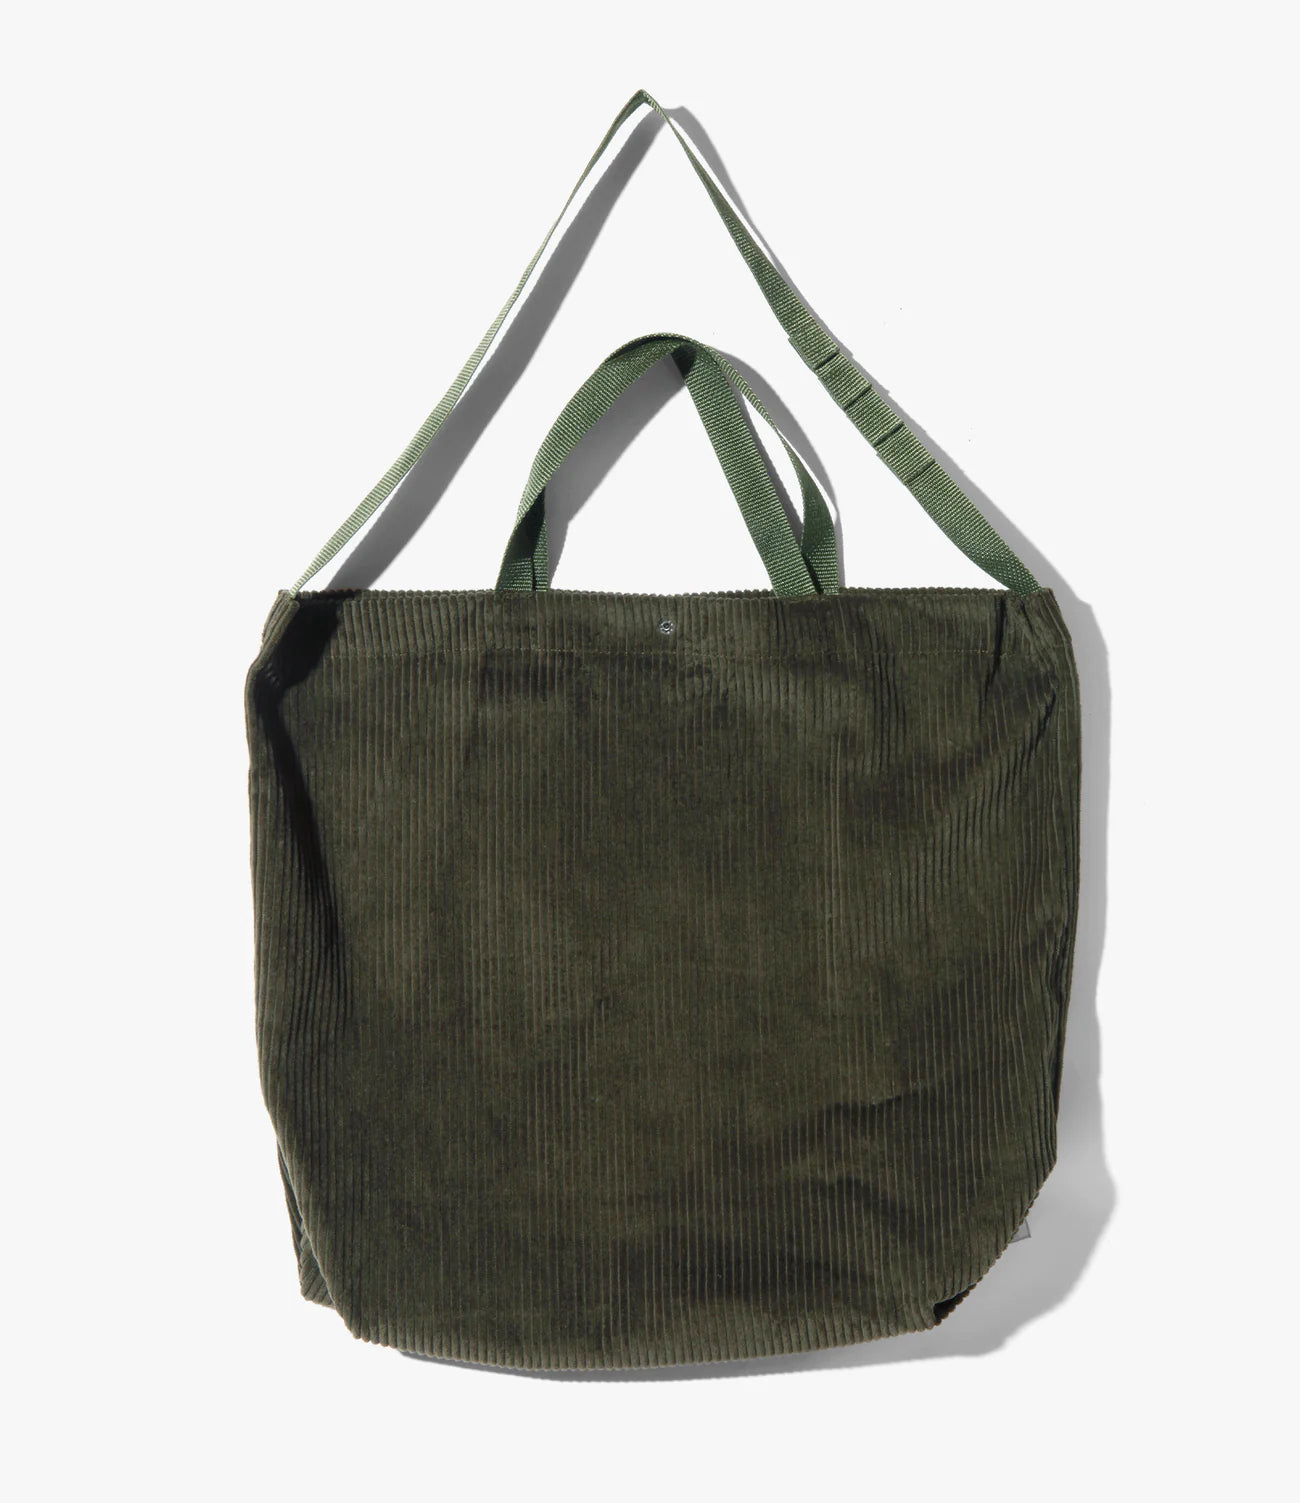 SALE】 Engineered Garments【Carry All Tote】 バッグ 